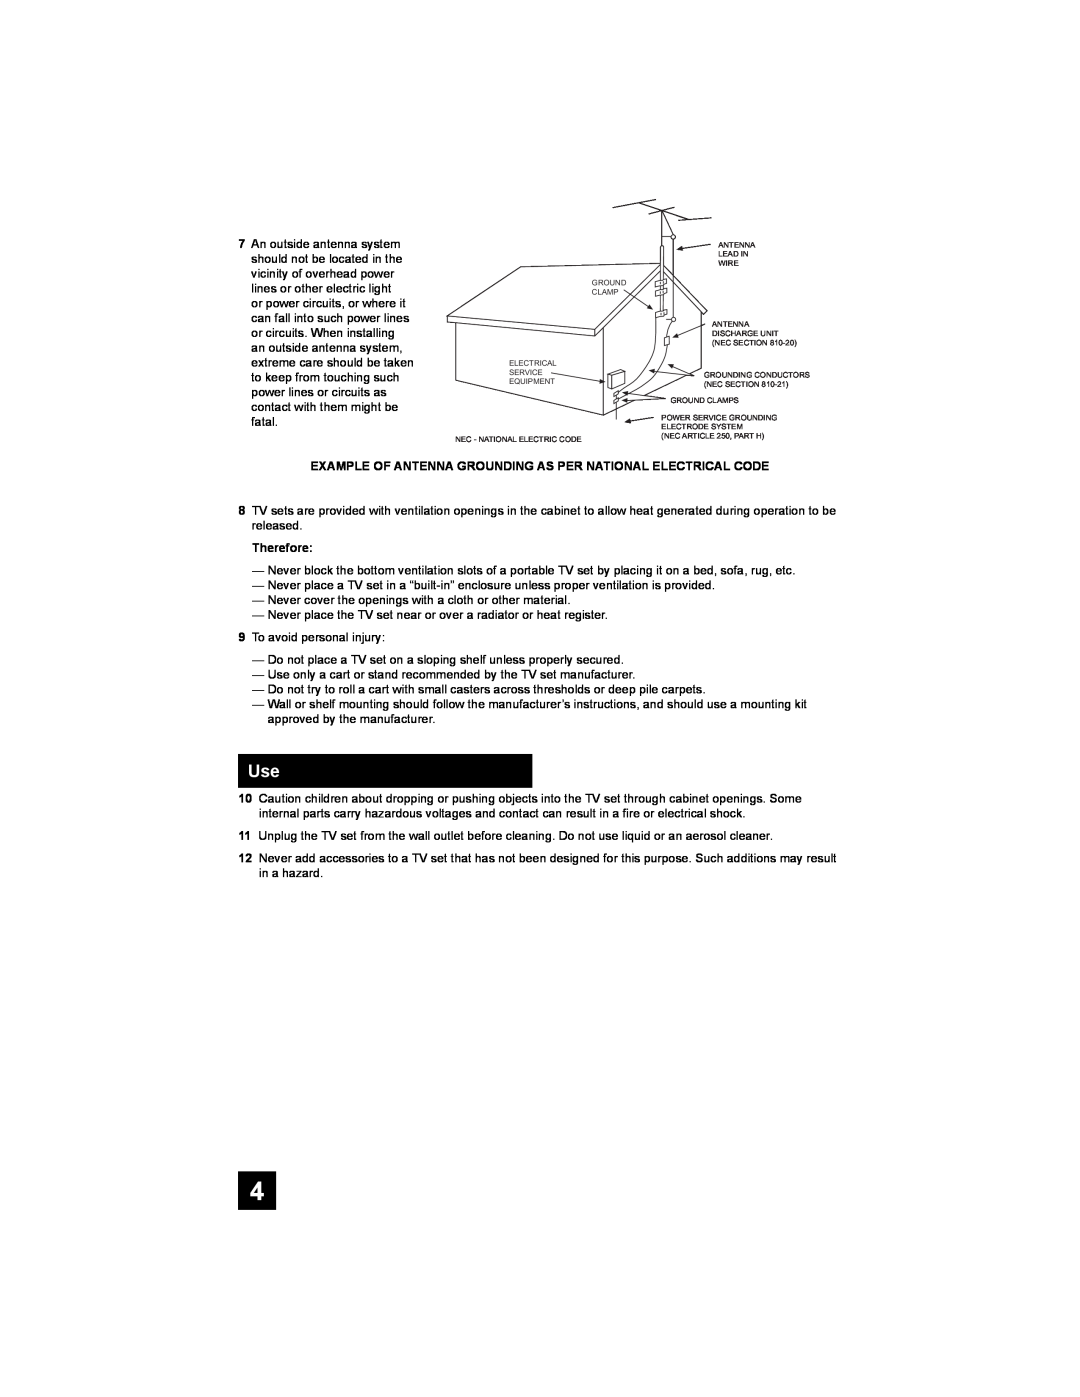 JVC AV 30W476 manual Example Of Antenna Grounding As Per National Electrical Code, Therefore 